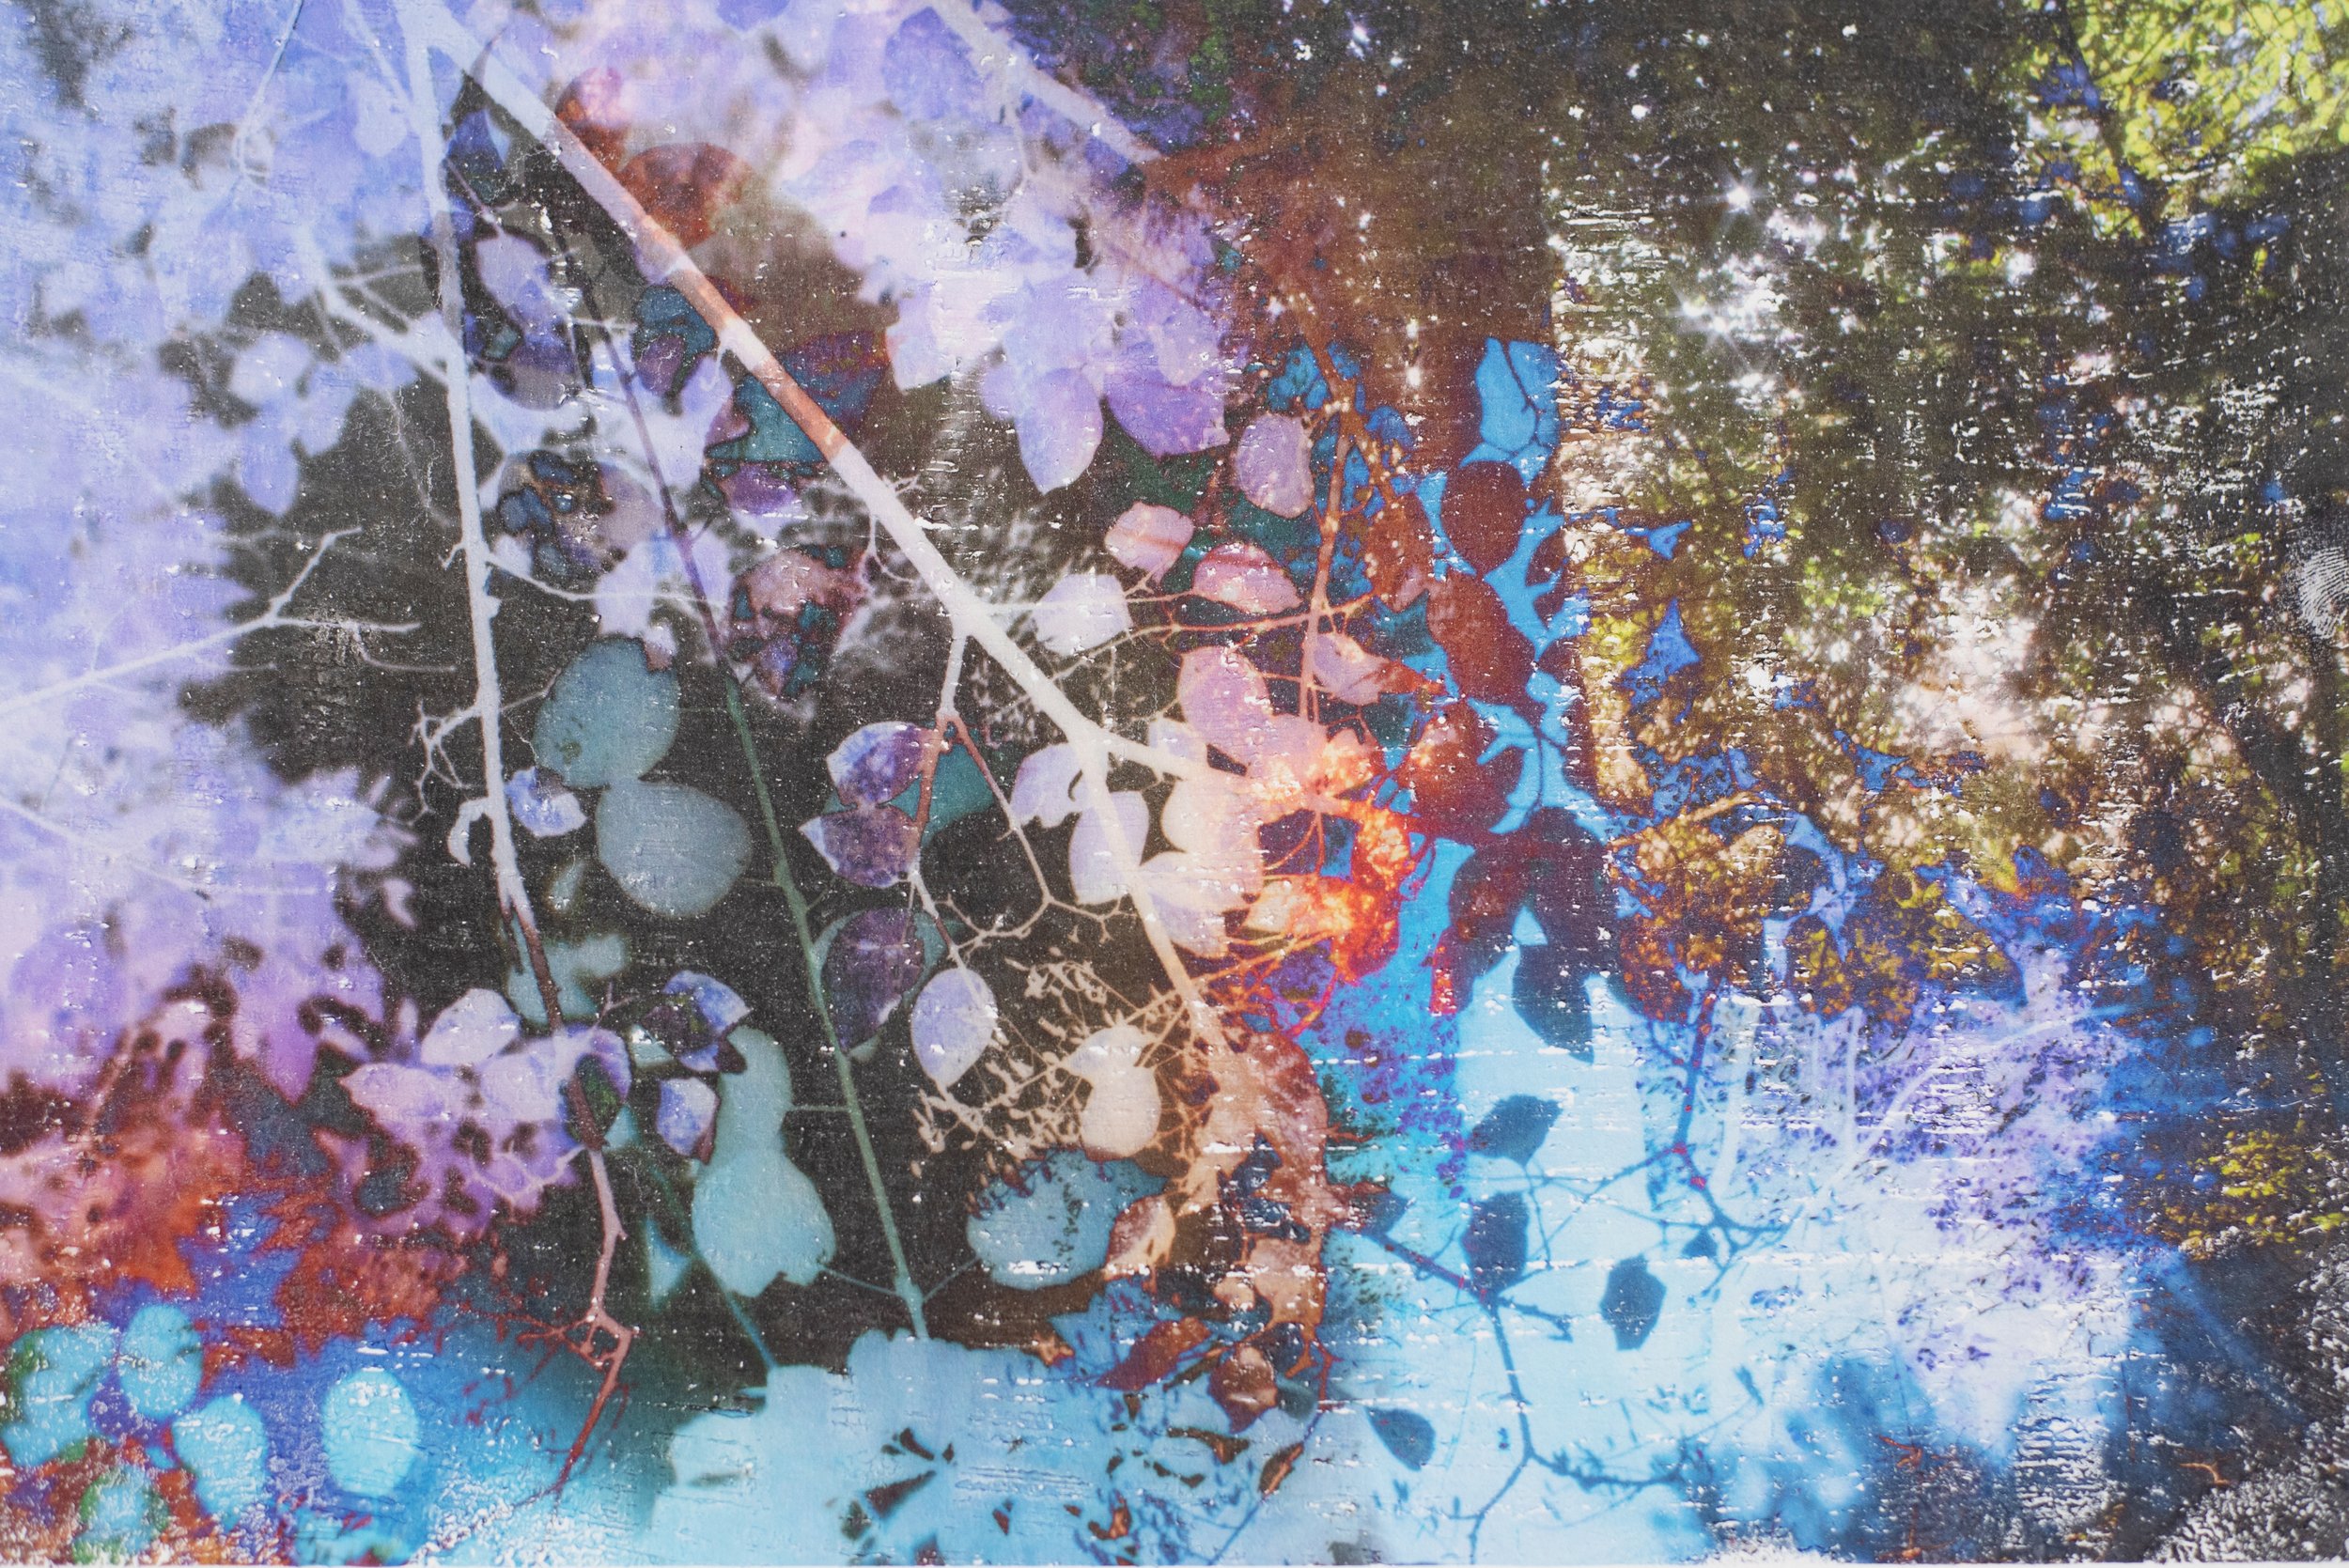  Hyperstimulation Fracture 0649, 2019 8x10”  Archival Pigment Photo Transfer on Watercolor Paper 